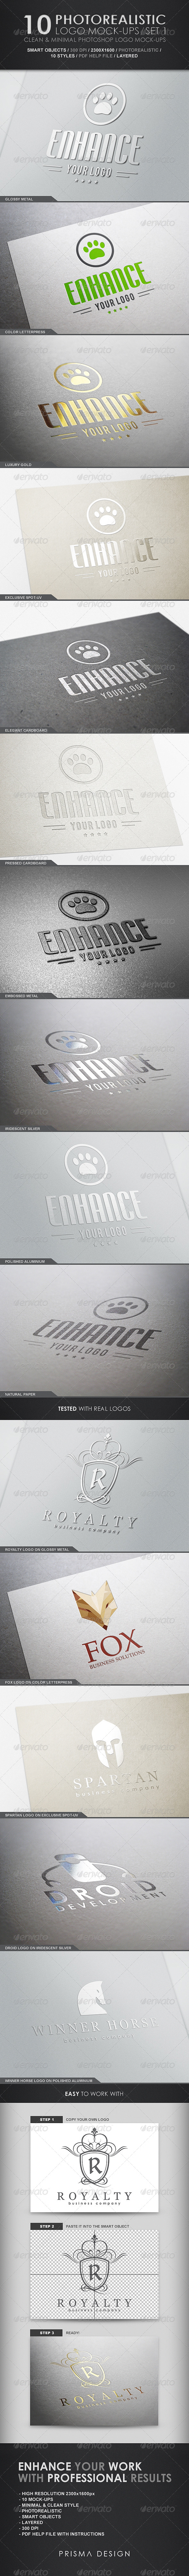 Graphics: 300 Dpi Aesthetic Designs Arranged Layers Clean Clean Design Elegant Psd Embossed Style Envato Item Exclusive Gold Golden Graphicriver Author Hi-res High Resolution Letterpress Effect Logo Enhancer Luxury Minimalist Mockup Photo Photorealistic Mock-up Photoshop Mock-ups Pro Graphics Product Psd Quality Papers Realistic Surface Silver Smart Objects Texture Paper